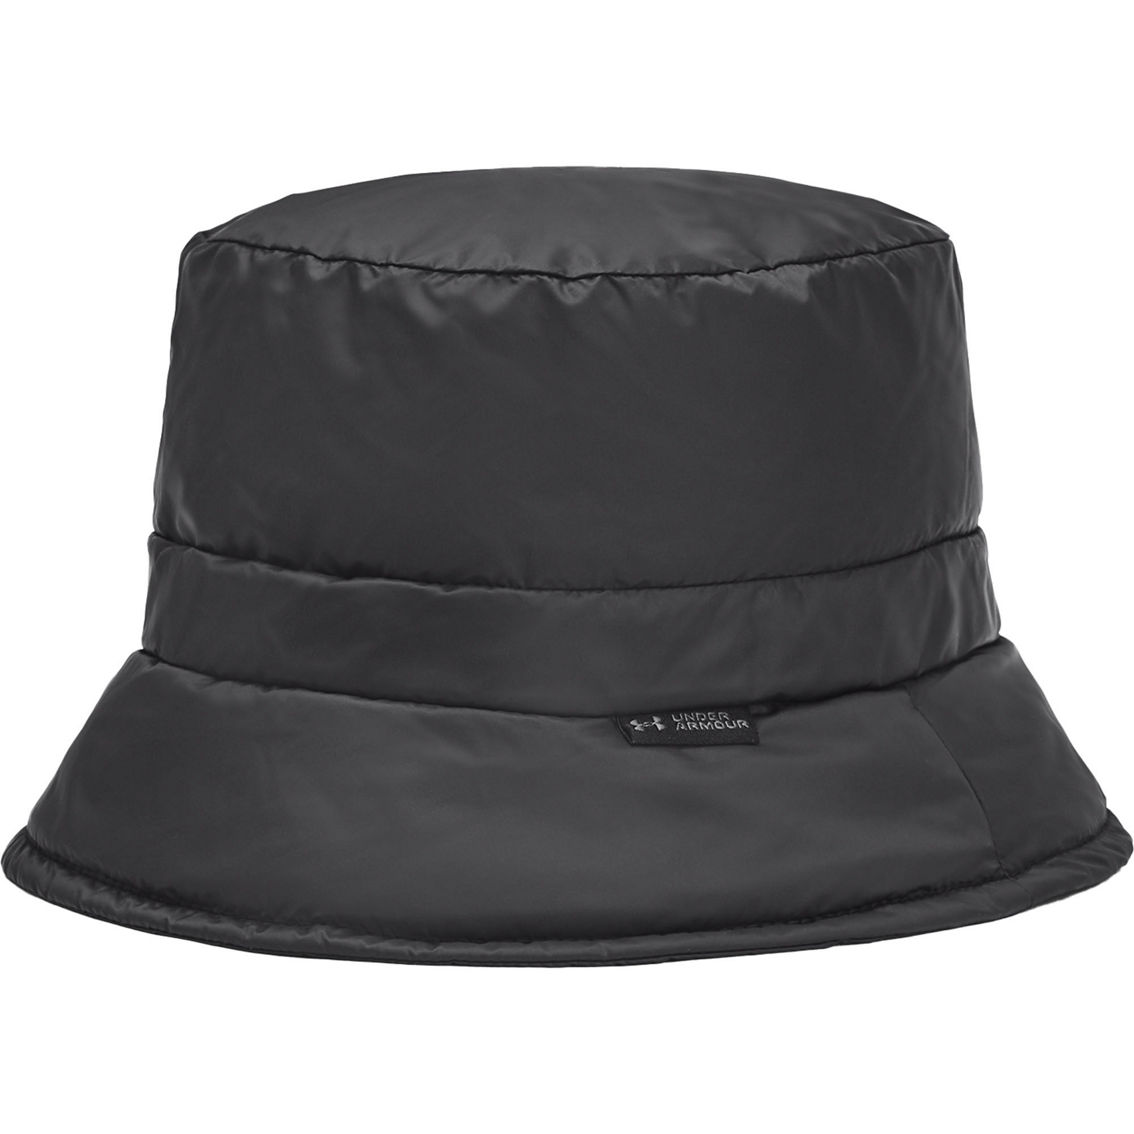 Under Armour Insulated Adjustable Bucket Hat - Image 2 of 3